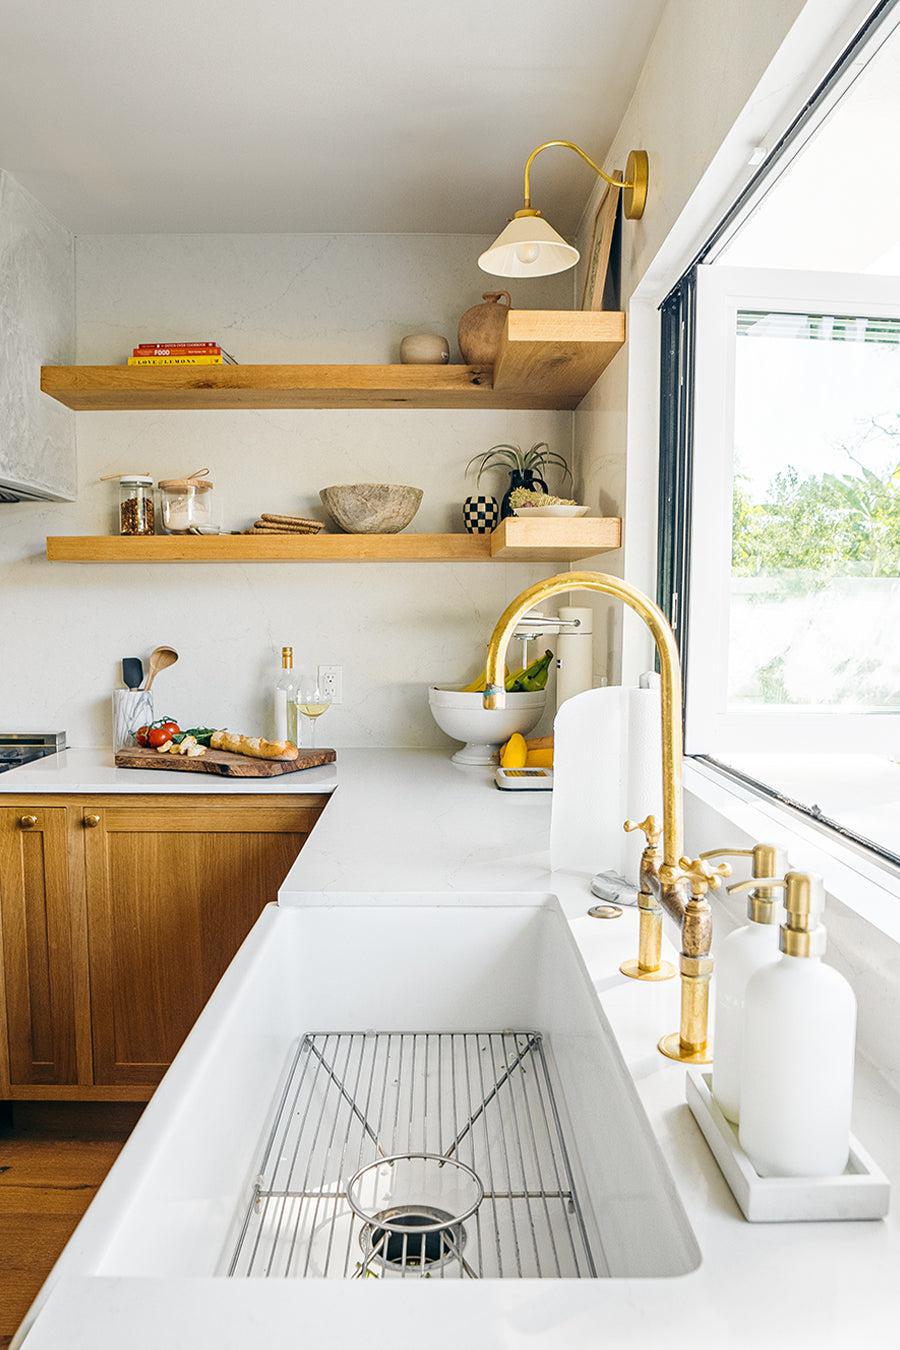 MIke Pyle's ZLINE faucet and sink